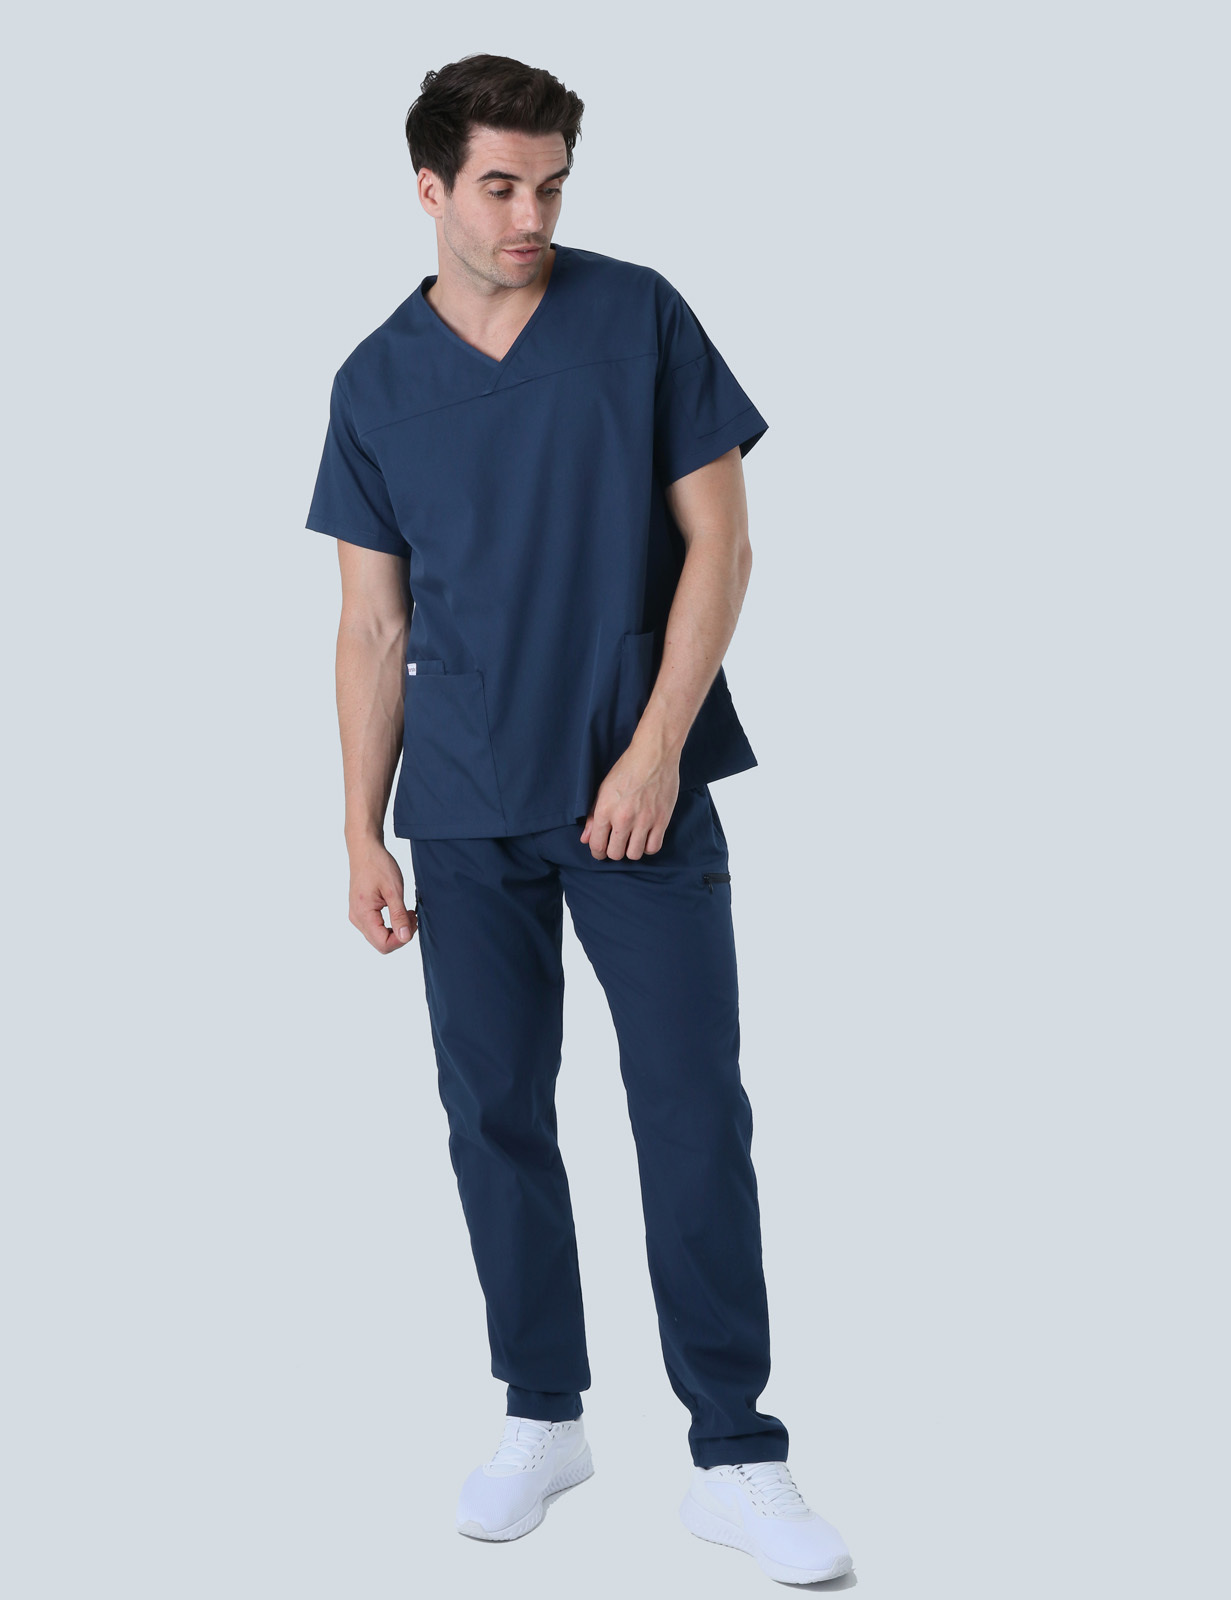 Men's Fit Solid Scrub Top - Navy - X Small - 0